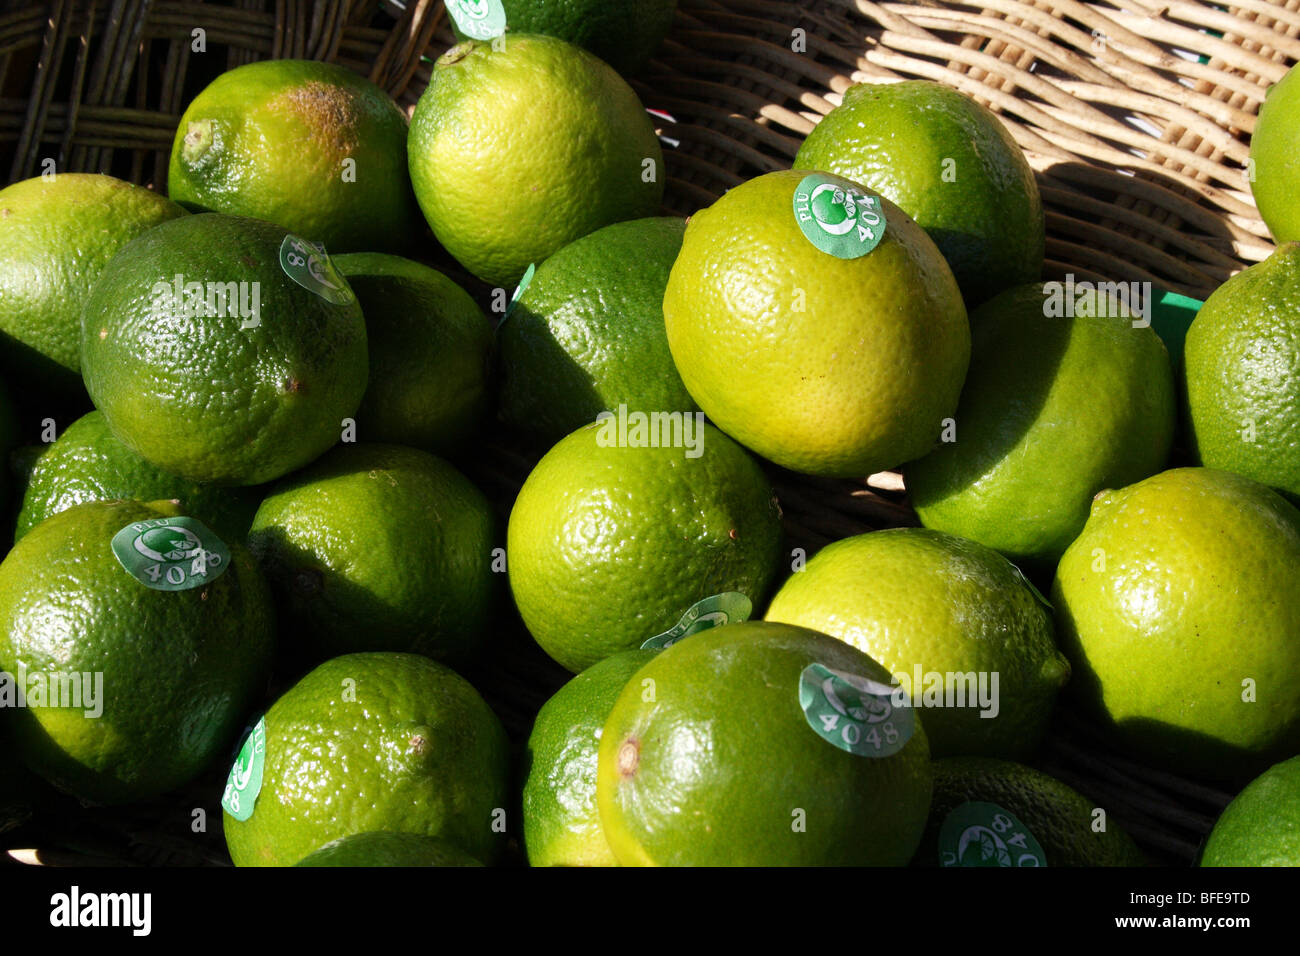 Green Limes a Citrus fruit in the Family Rutaceae Stock Photo